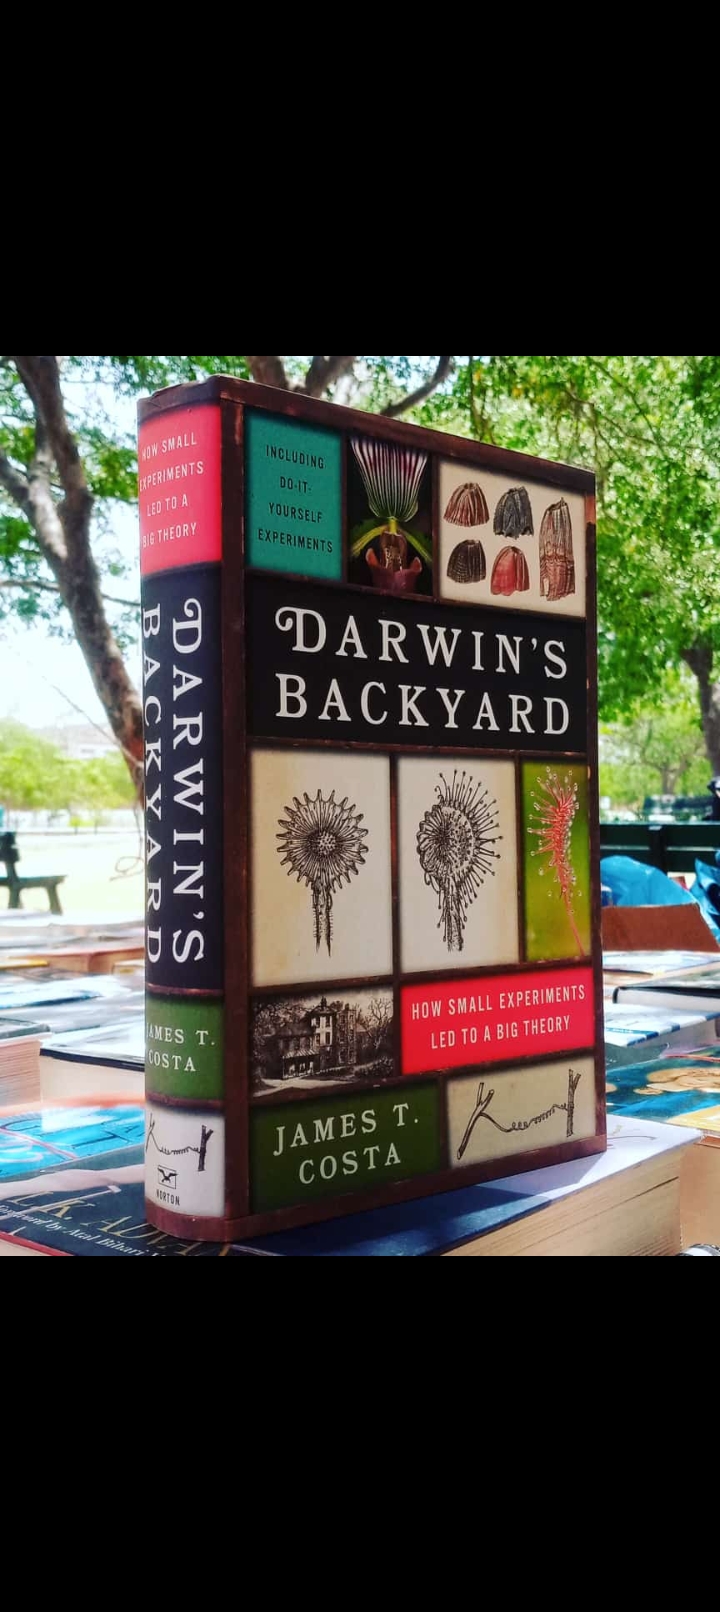 darwin's backyard. how small experiments led to a big theory including do it yourself experiments by